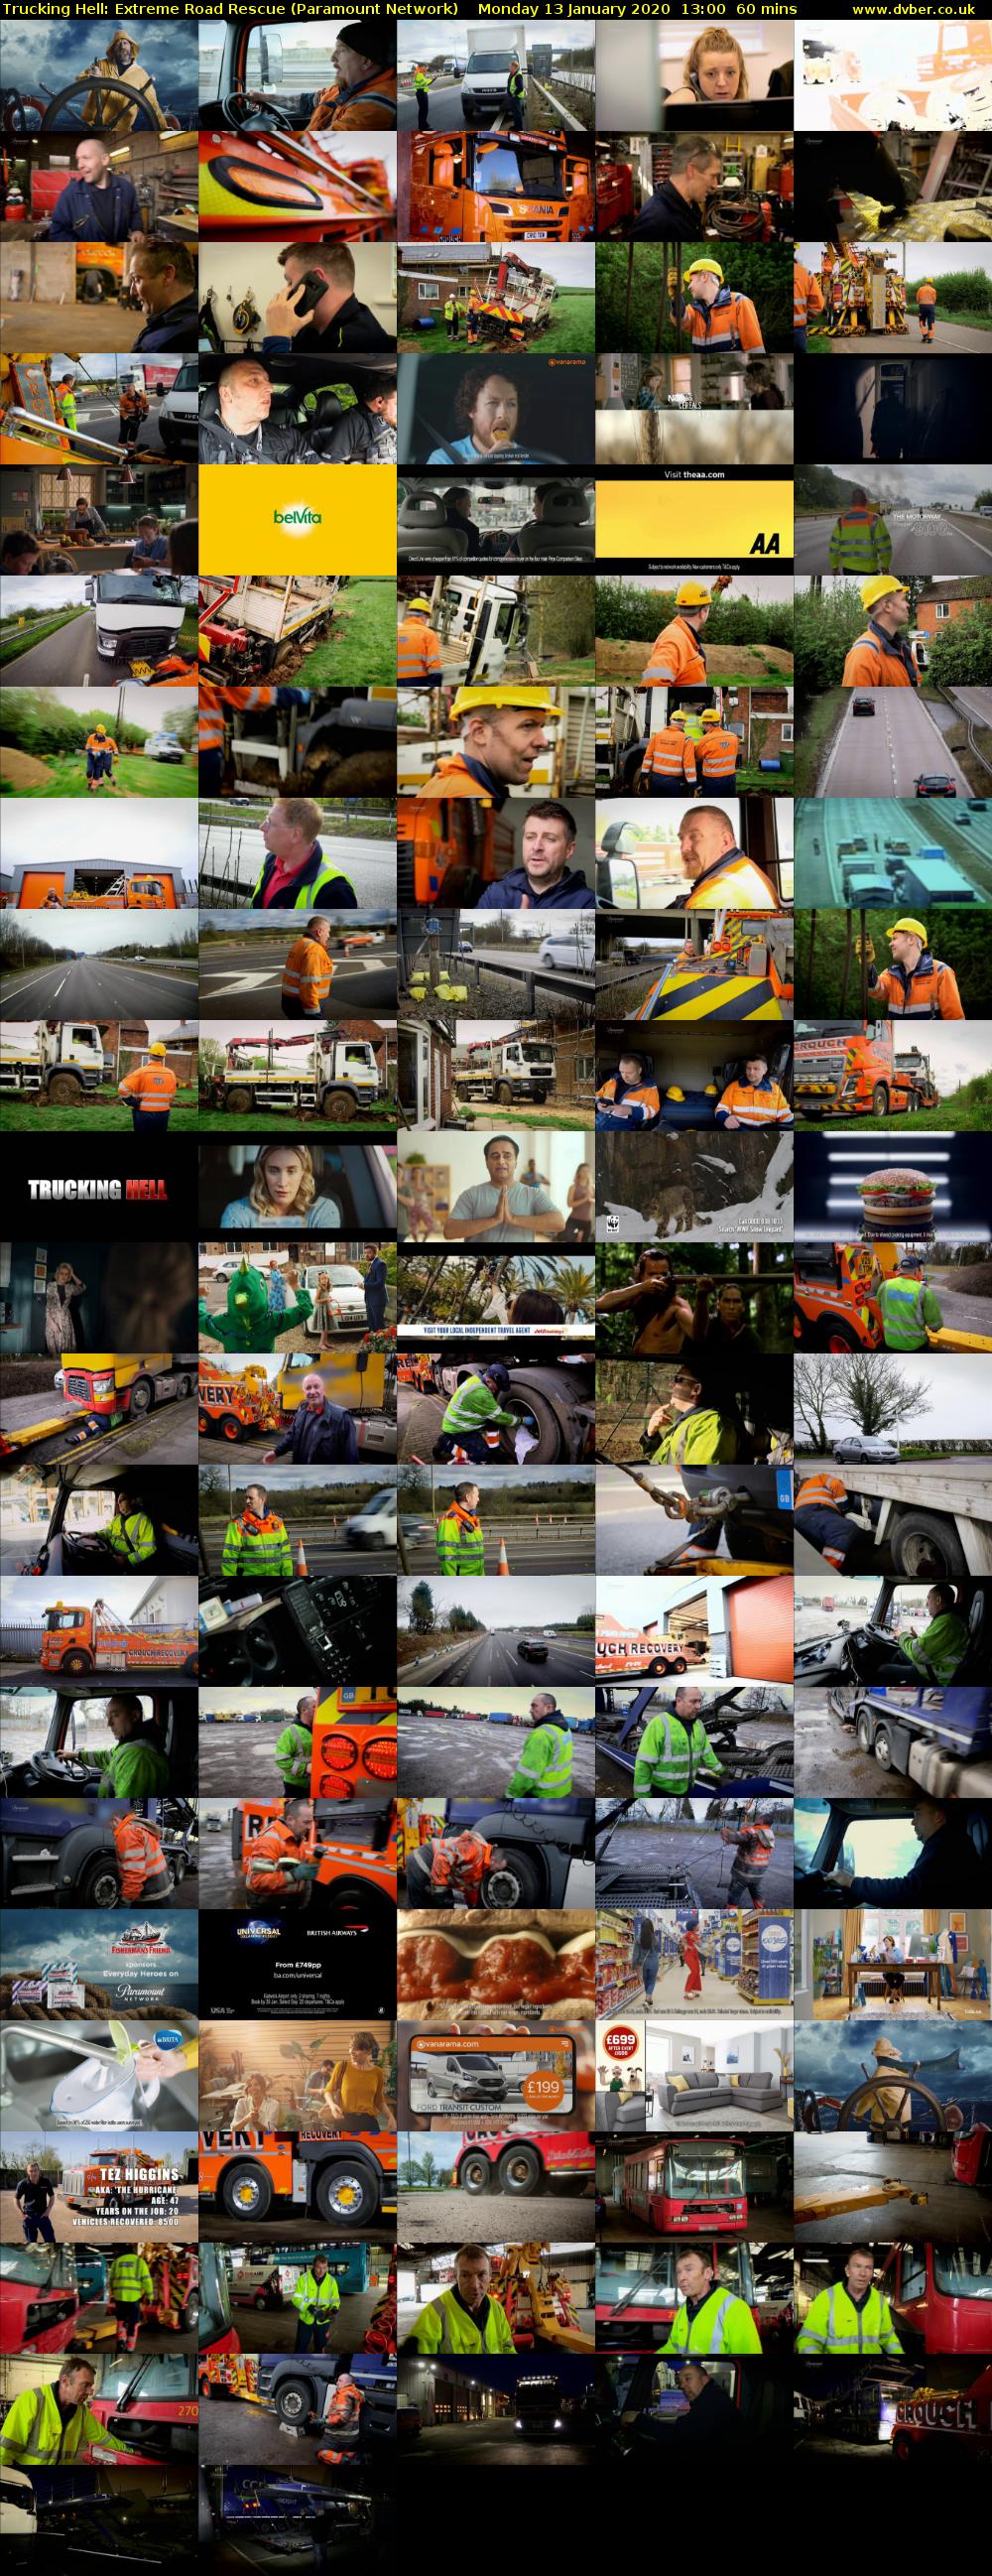 Trucking Hell: Extreme Road Rescue (Paramount Network) Monday 13 January 2020 13:00 - 14:00